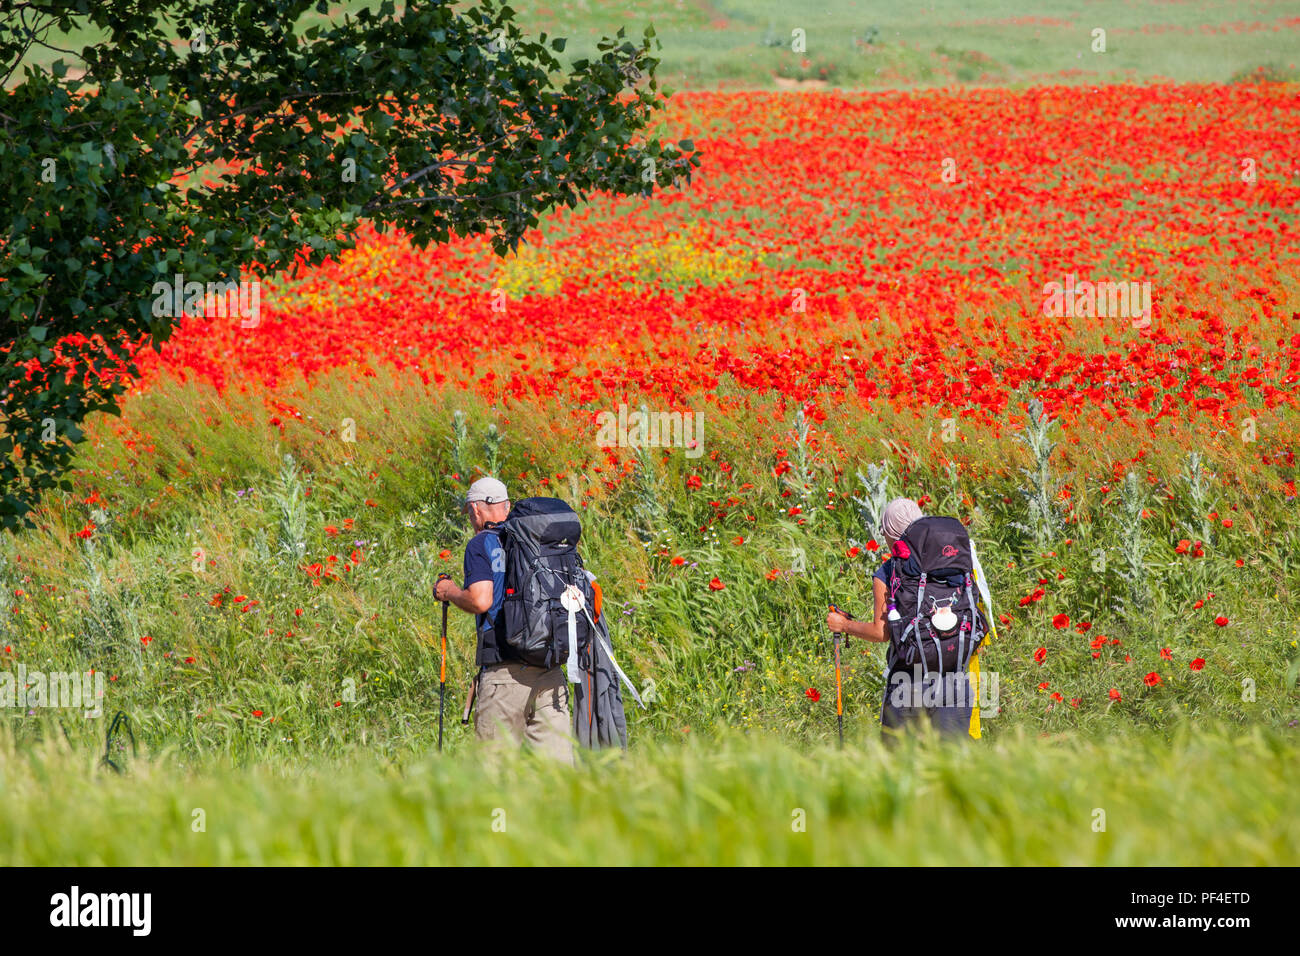 Pilgrims walking through poppy fields while walking the Spanish pilgrimage route the Camino de Santiago the way of St James at Castrojeriz Spain Stock Photo